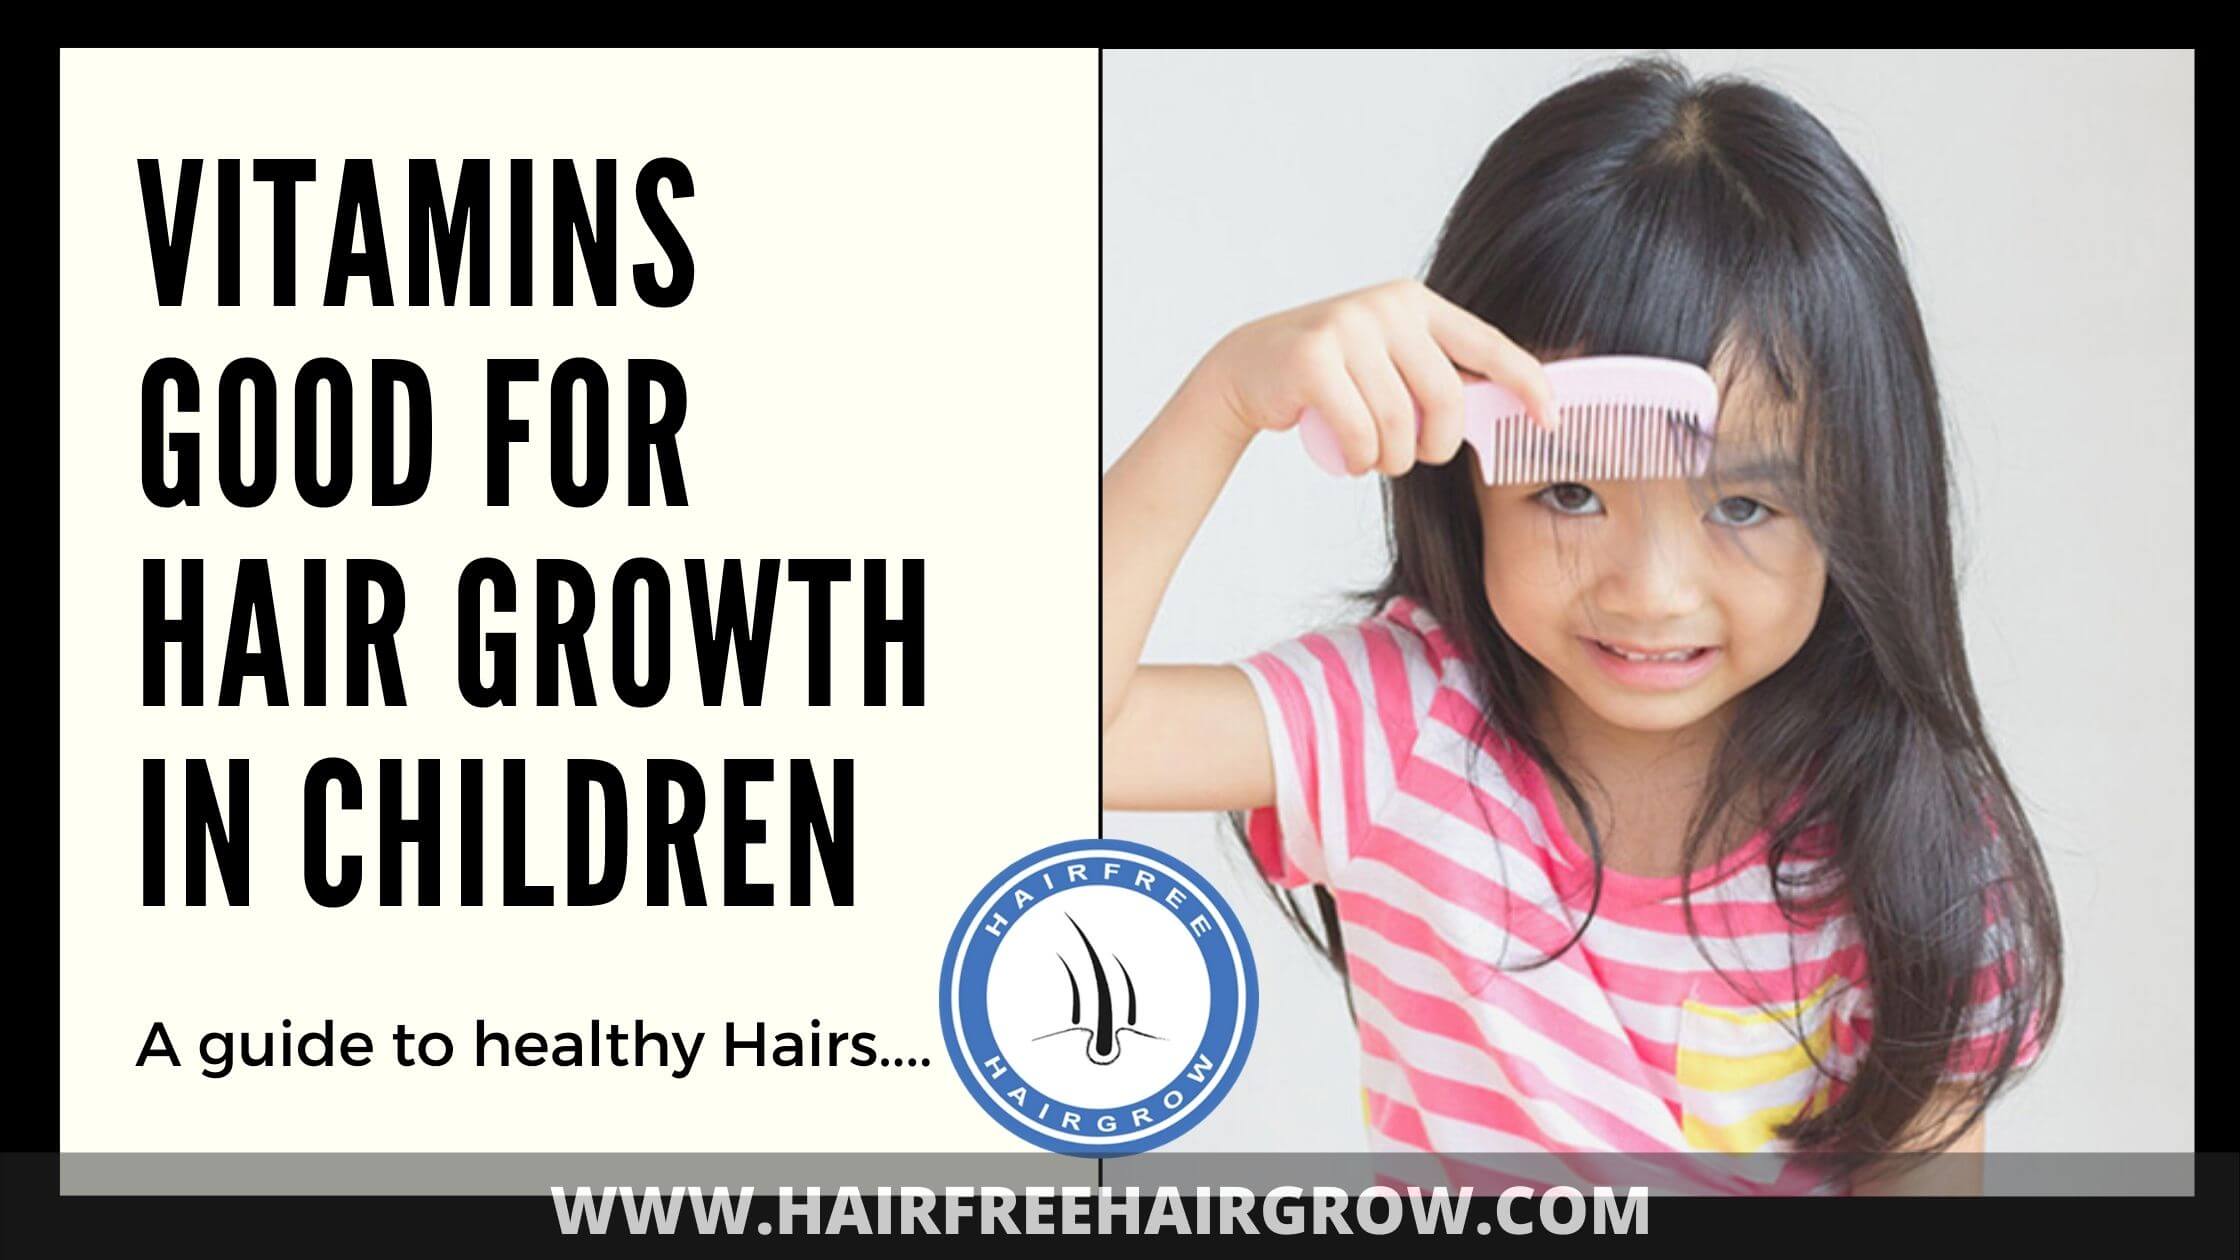 a cute girl kid combing her hair asking are vitamins good for hair growth in children